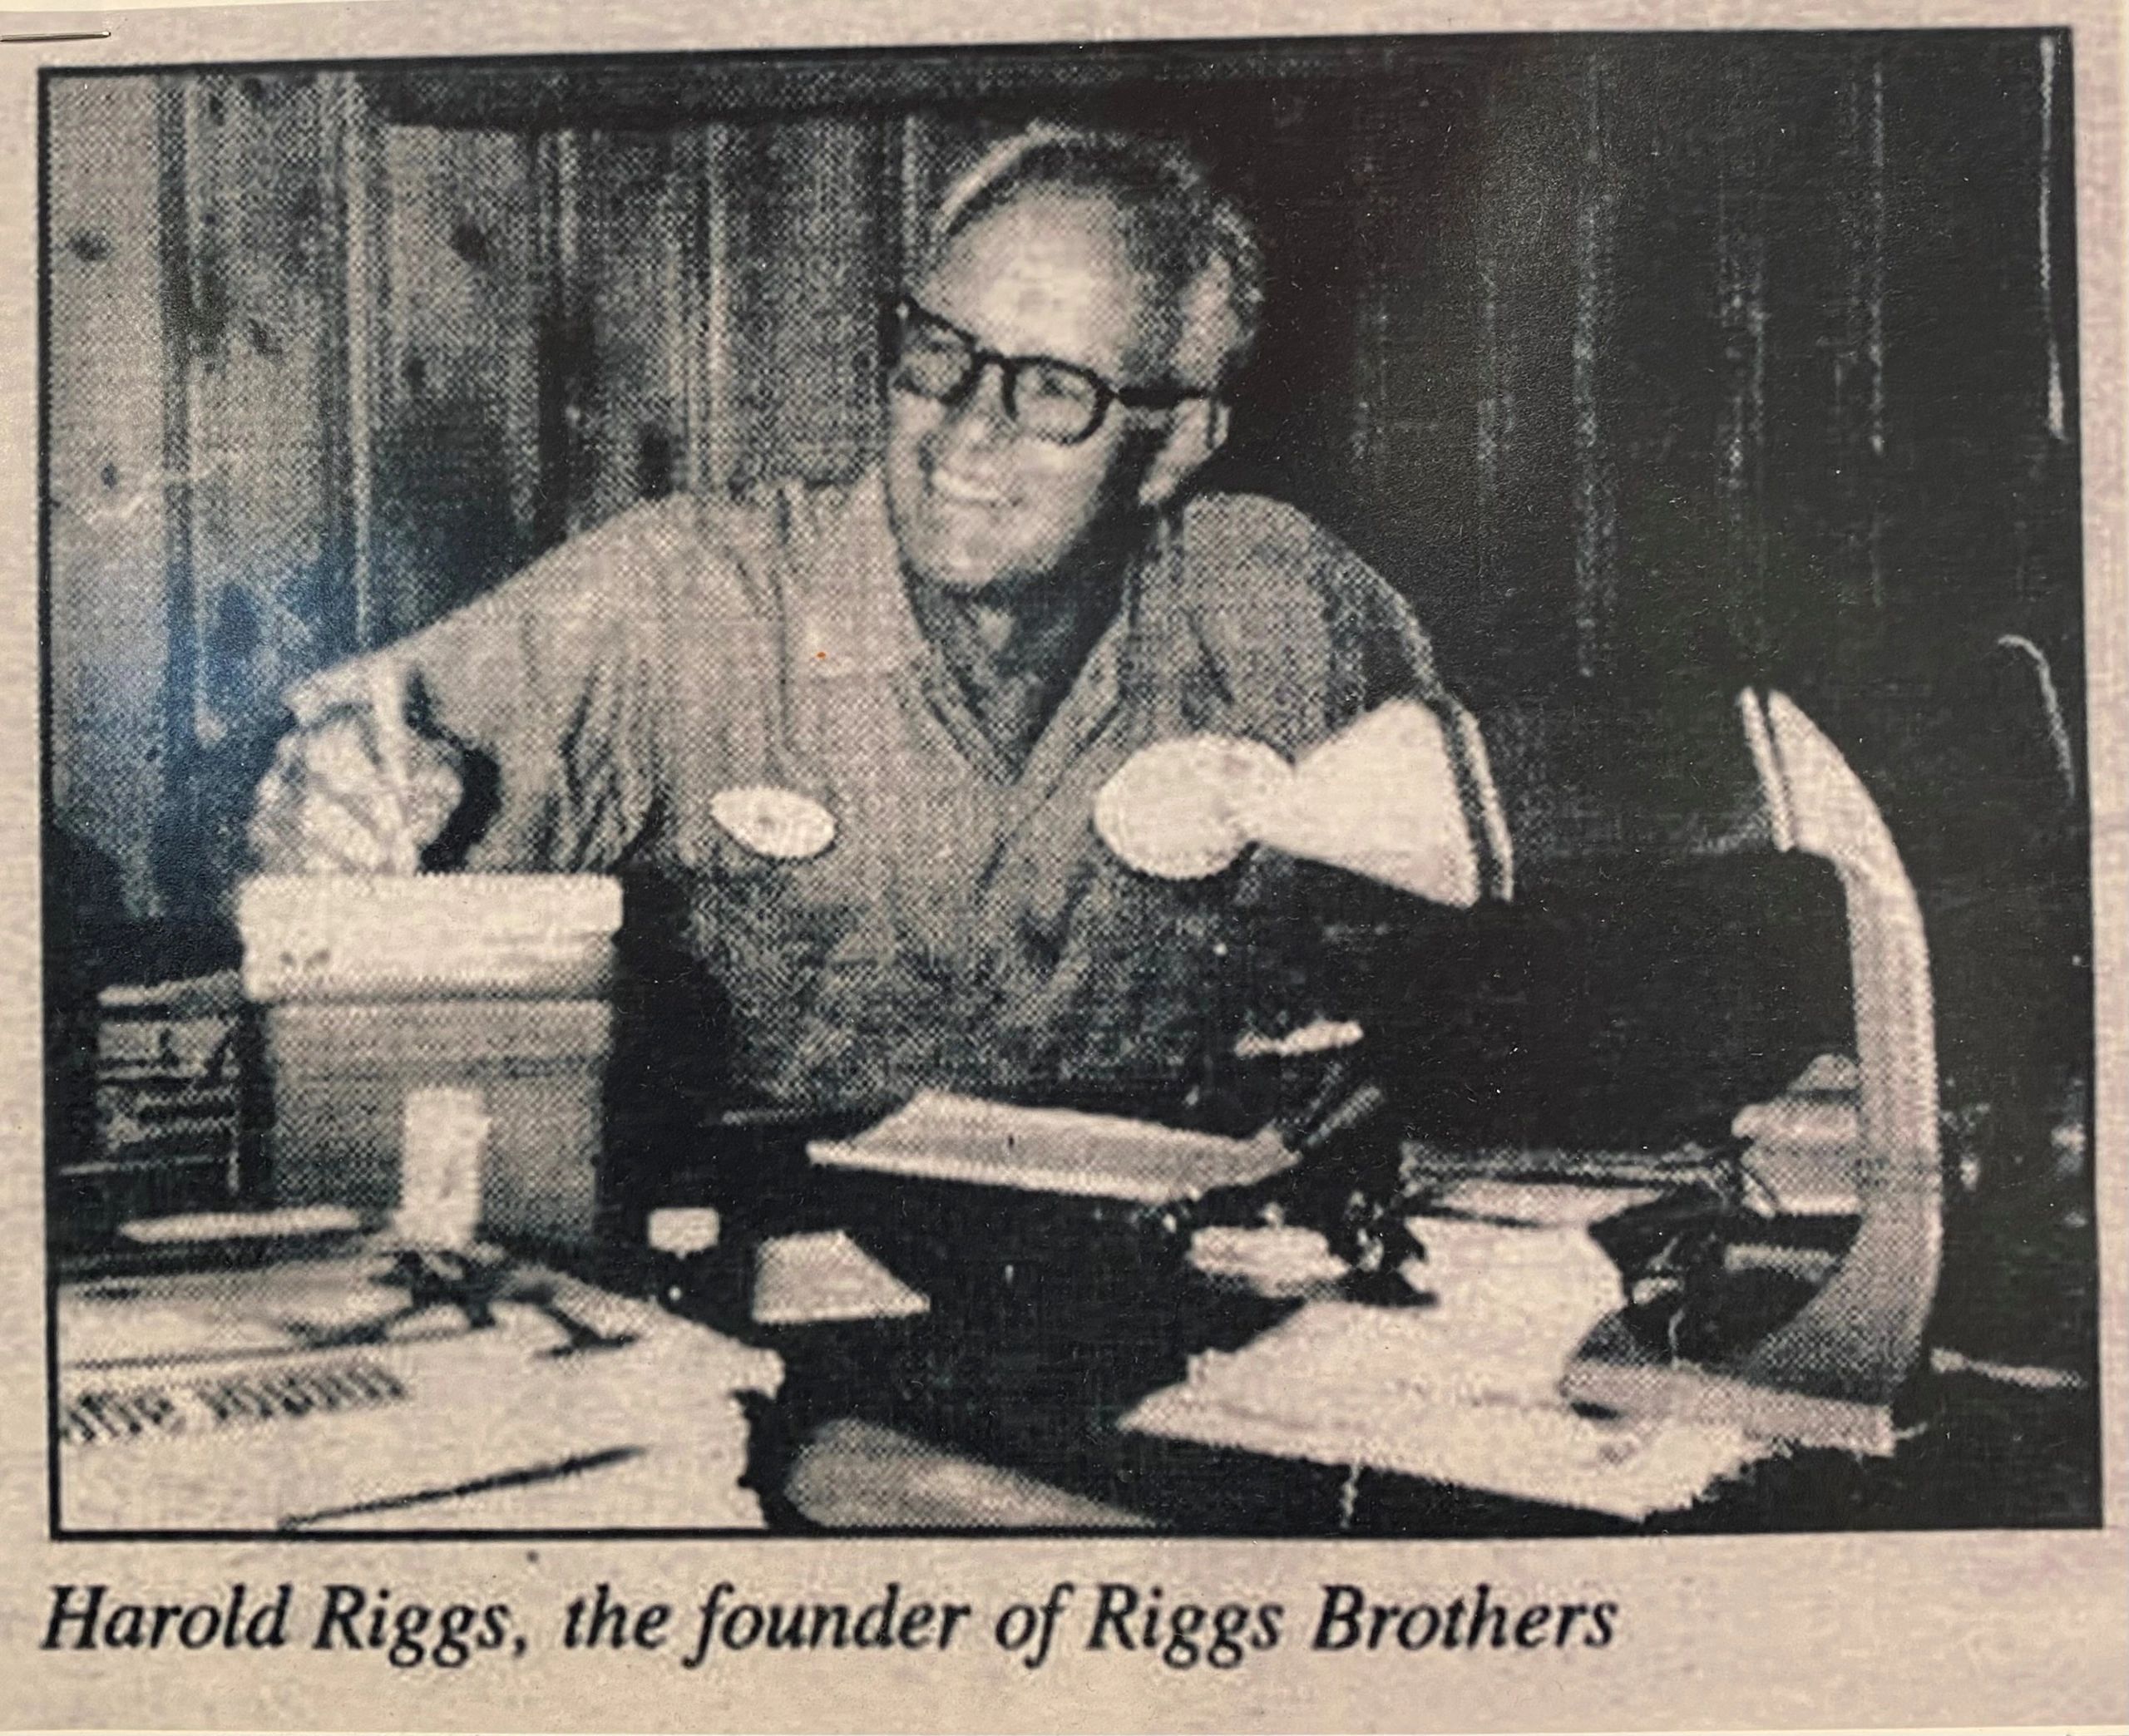 Riggs Brother's Founder Harold Riggs